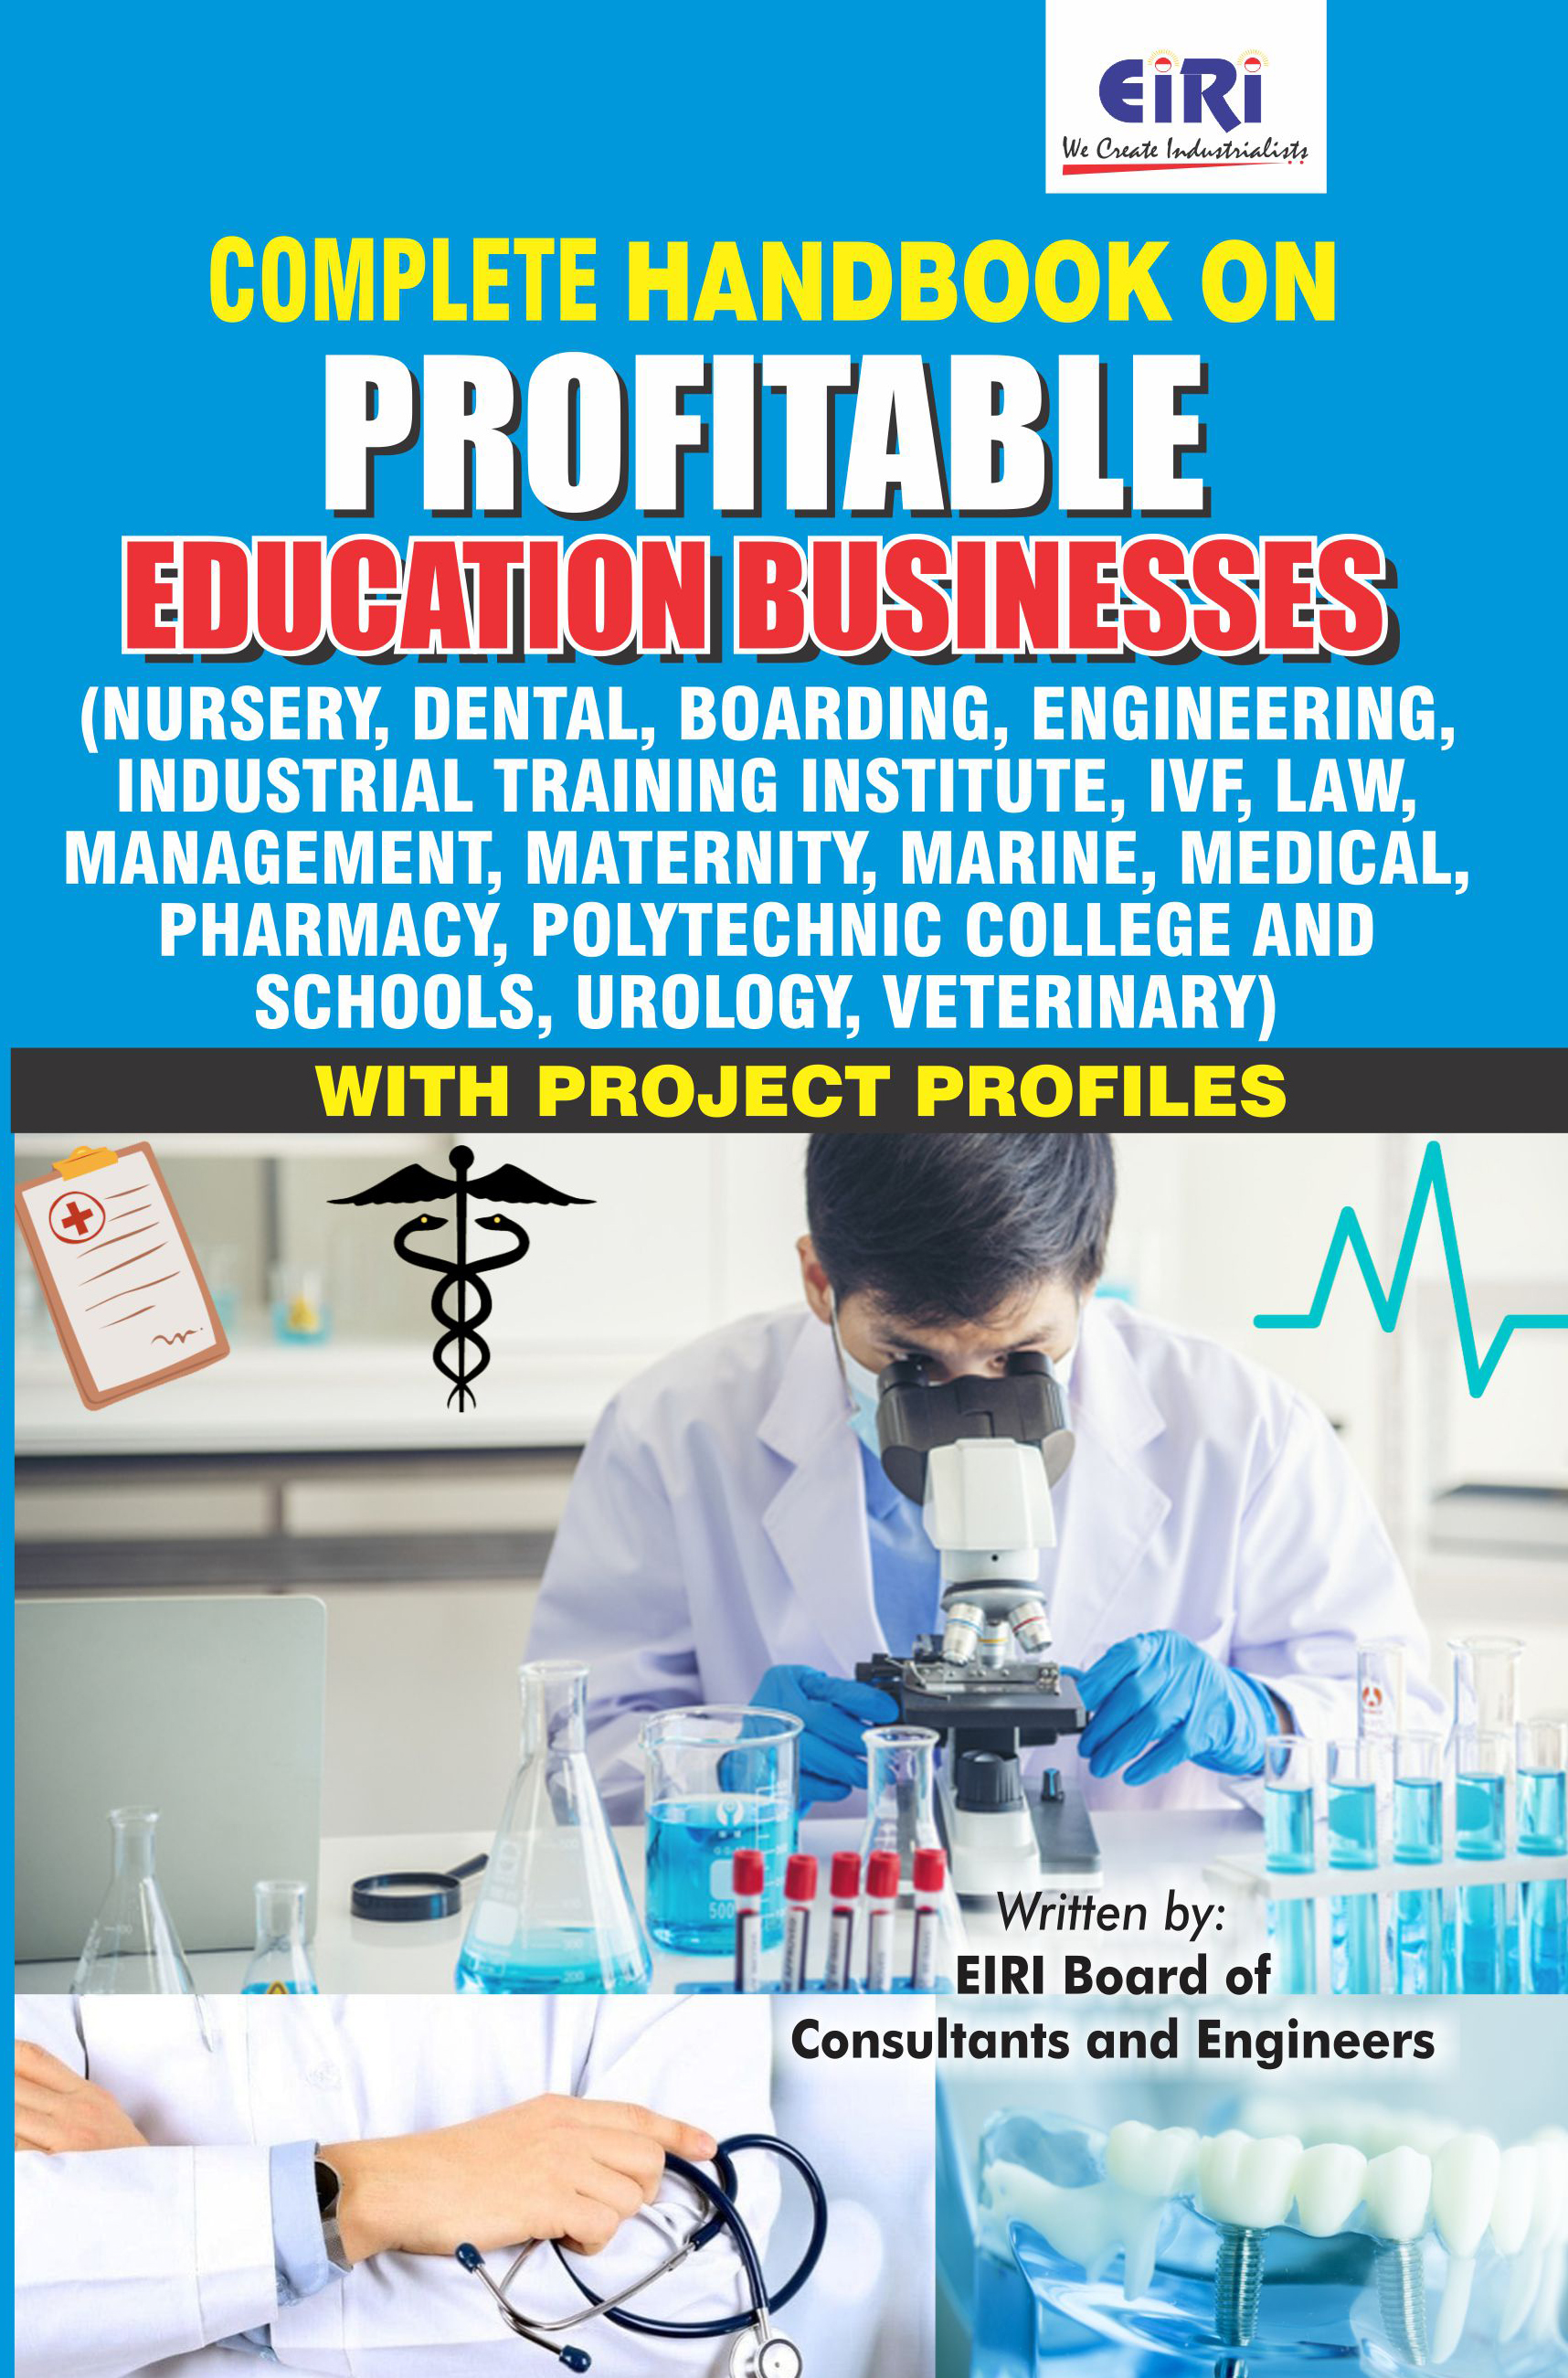 Complete Handbook on Profitable Education Businesses (Nursery, Dental, Boarding, Engineering, Industrial Training Institute, IVF, Law, Management, Maternity, Medical, Pharmacy and Schools, Veterinary) with Project Profiles